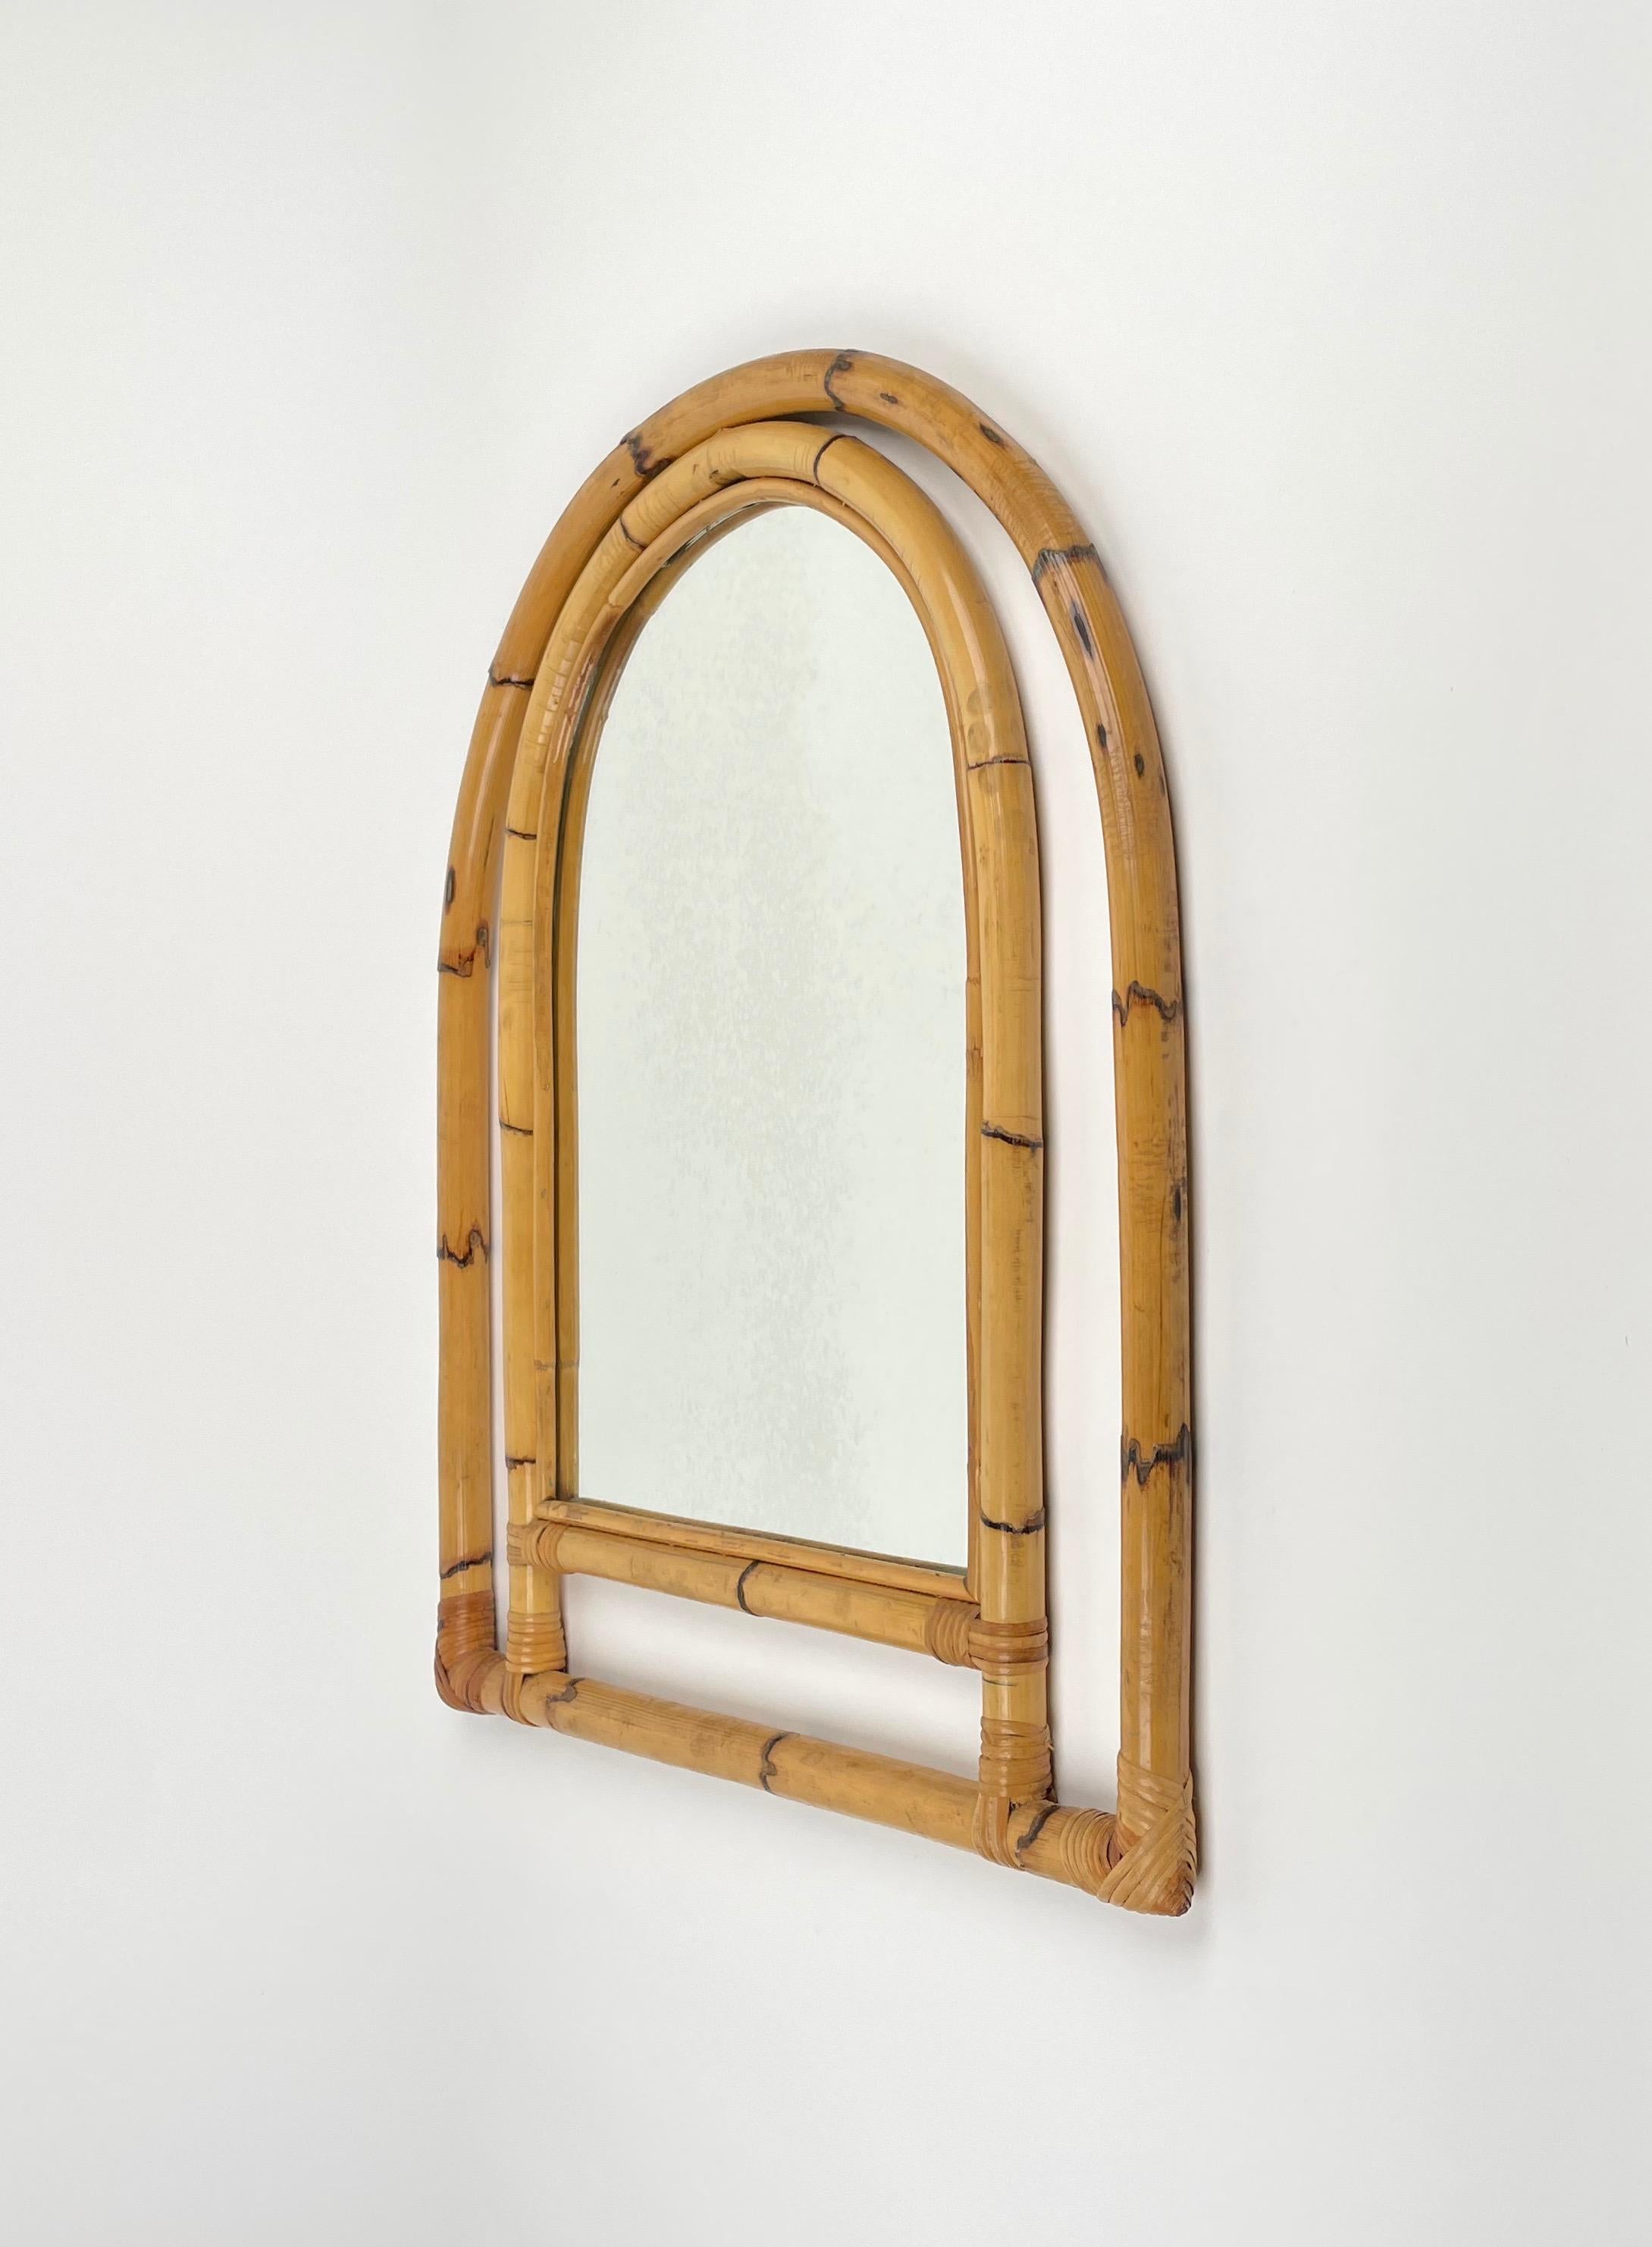 Arched Bamboo & Rattan Wall Mirror, Italy 1970s For Sale 2